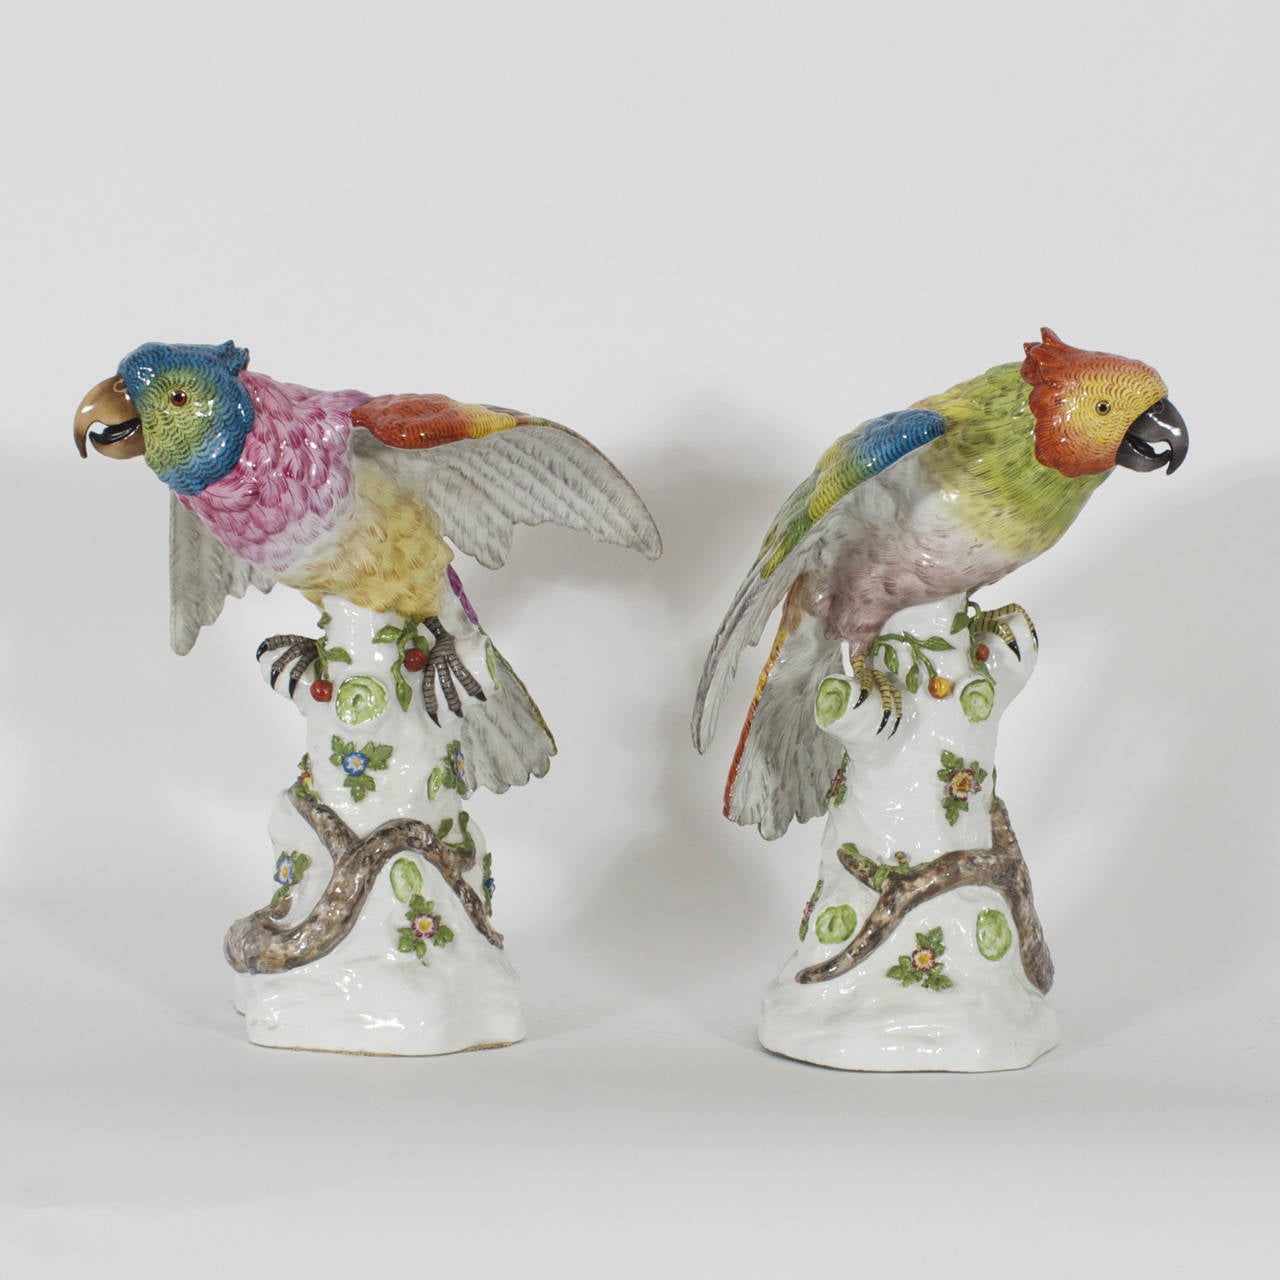 A fine pair of 19th century porcelain birds or parrots executed in old world quality, bright, colorful and loaded with charm. Signed with crossed arrows on the back of the base. Probably not Meissen or Dresden, but certainly a quality maker, based